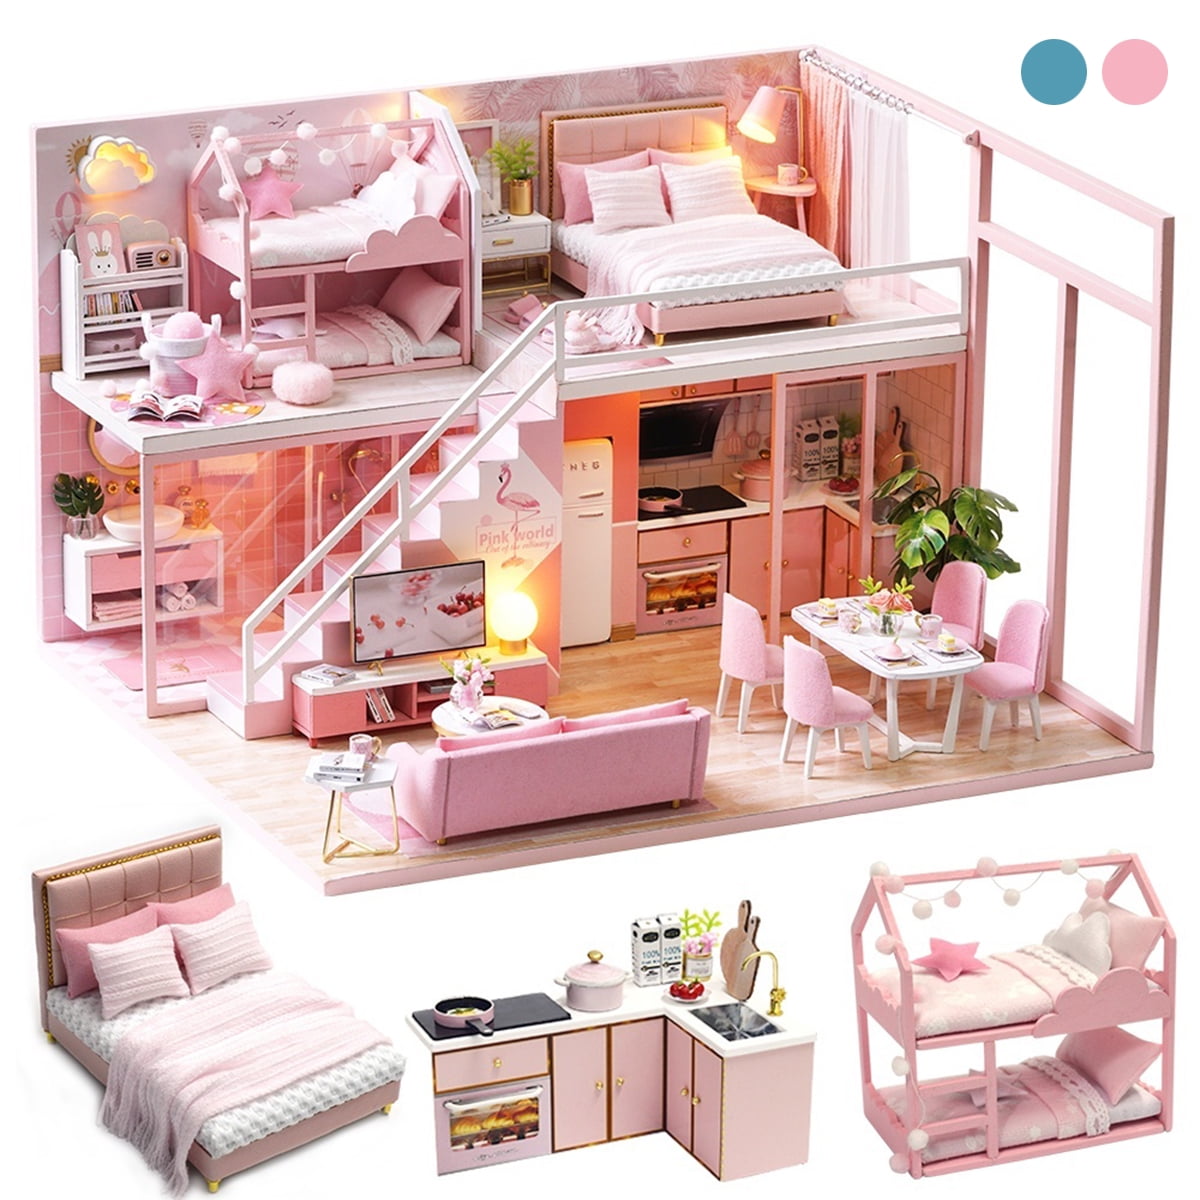 in a Happy Corner DIY Wooden Doll House Kit Box Theater Style 1:24 Scale Creative Room Idea Best Gift for Children Friend Lover Dollhouse Miniature with Furniture